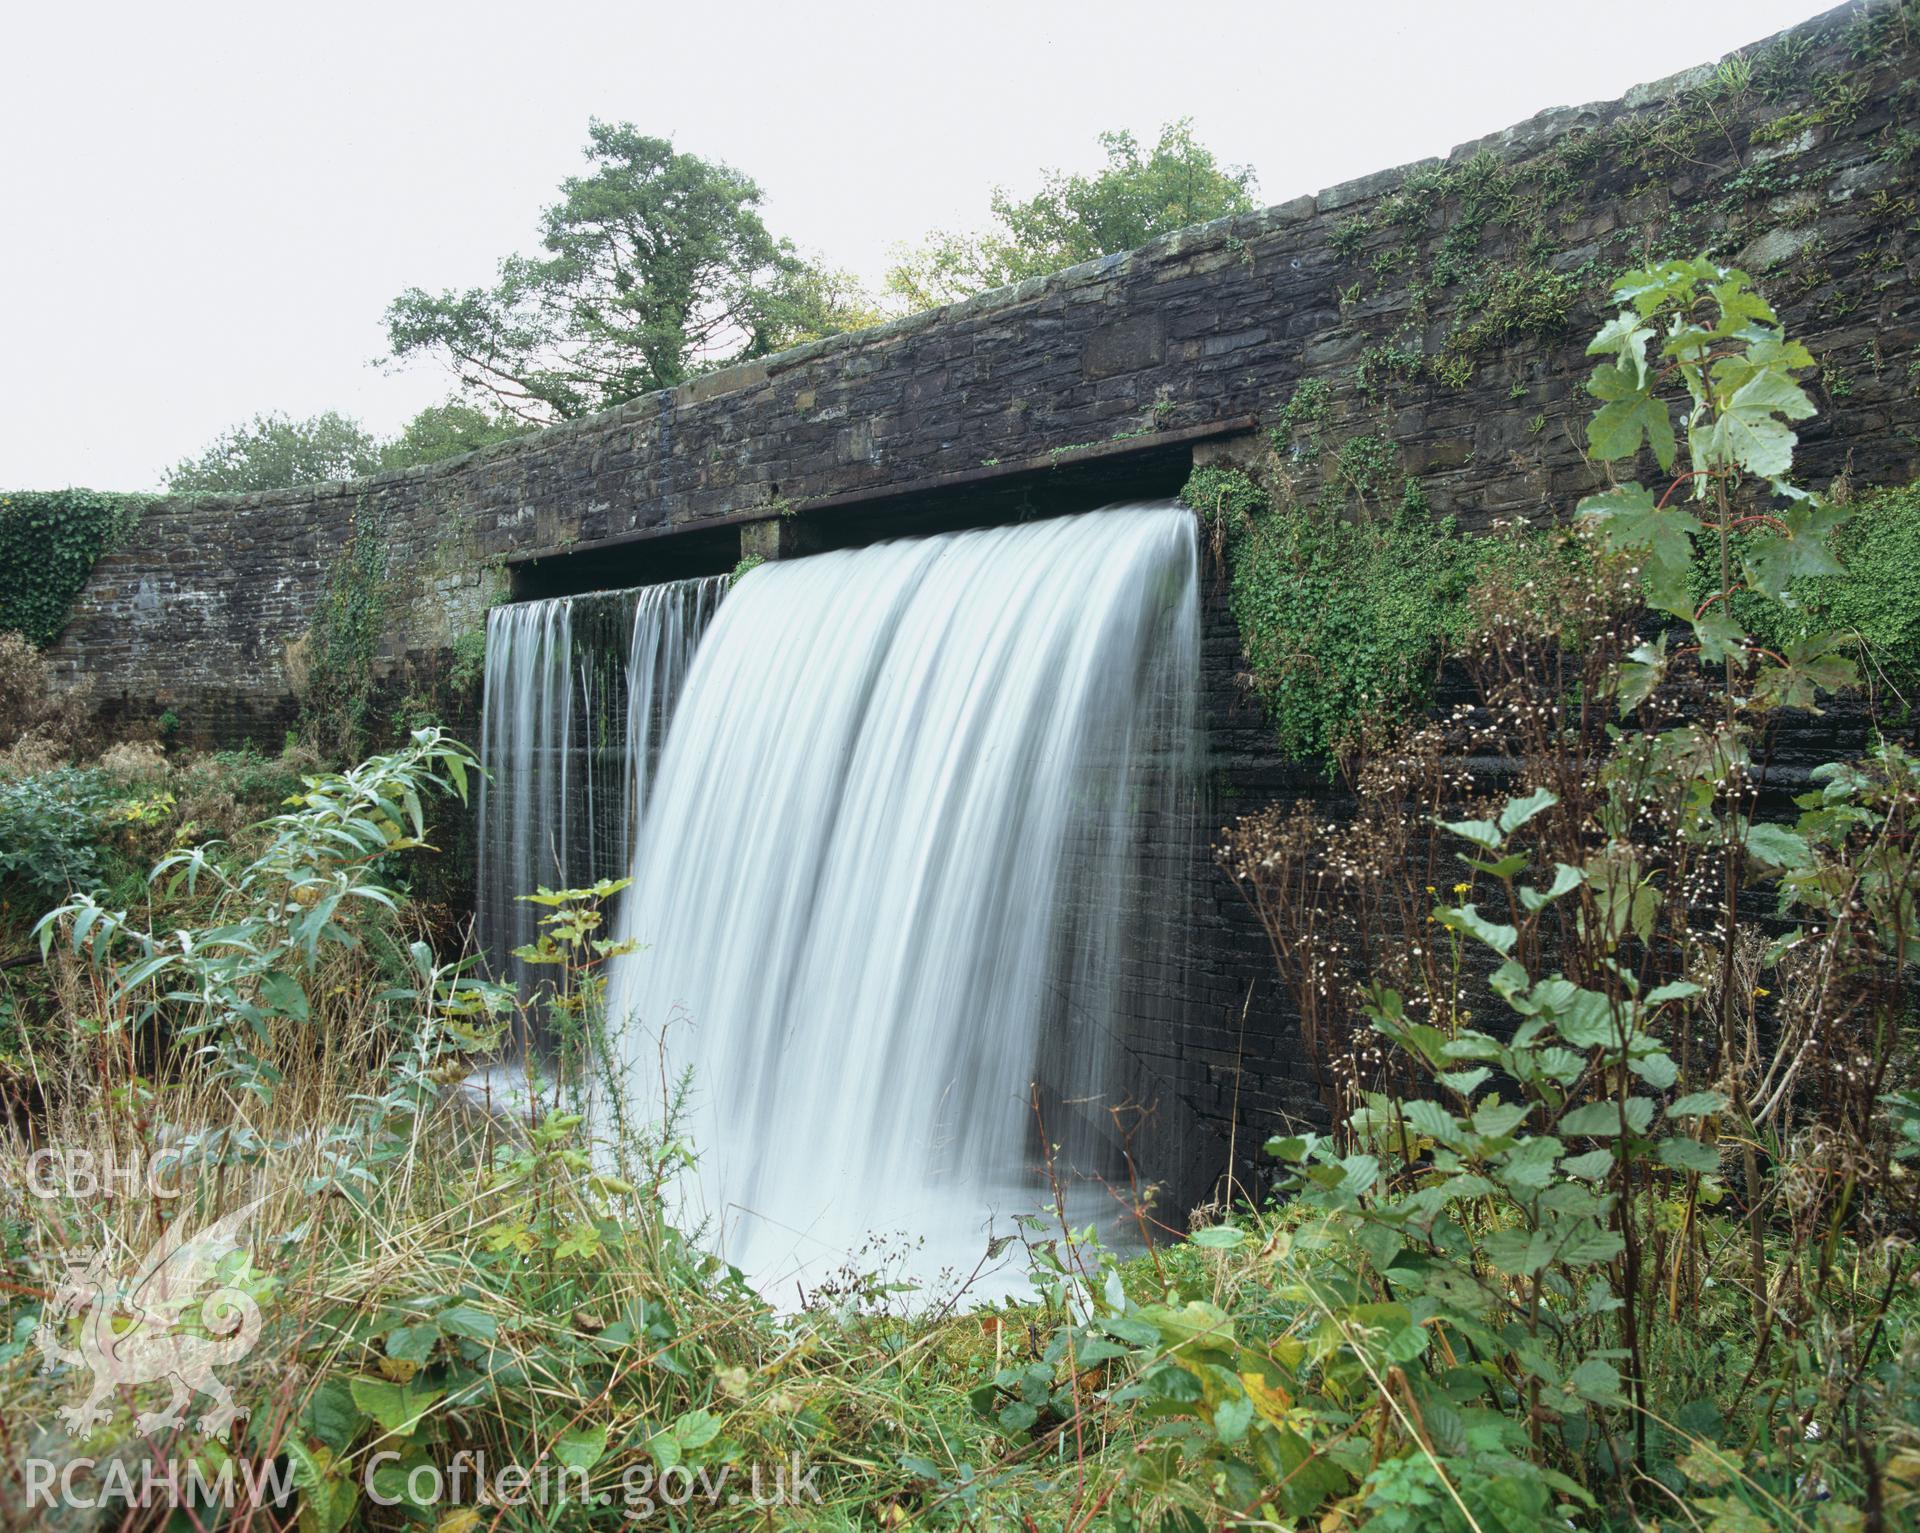 Colour transparency showing view of Lower Clydach Aqueduct, produced by Iain Wright, June 2004